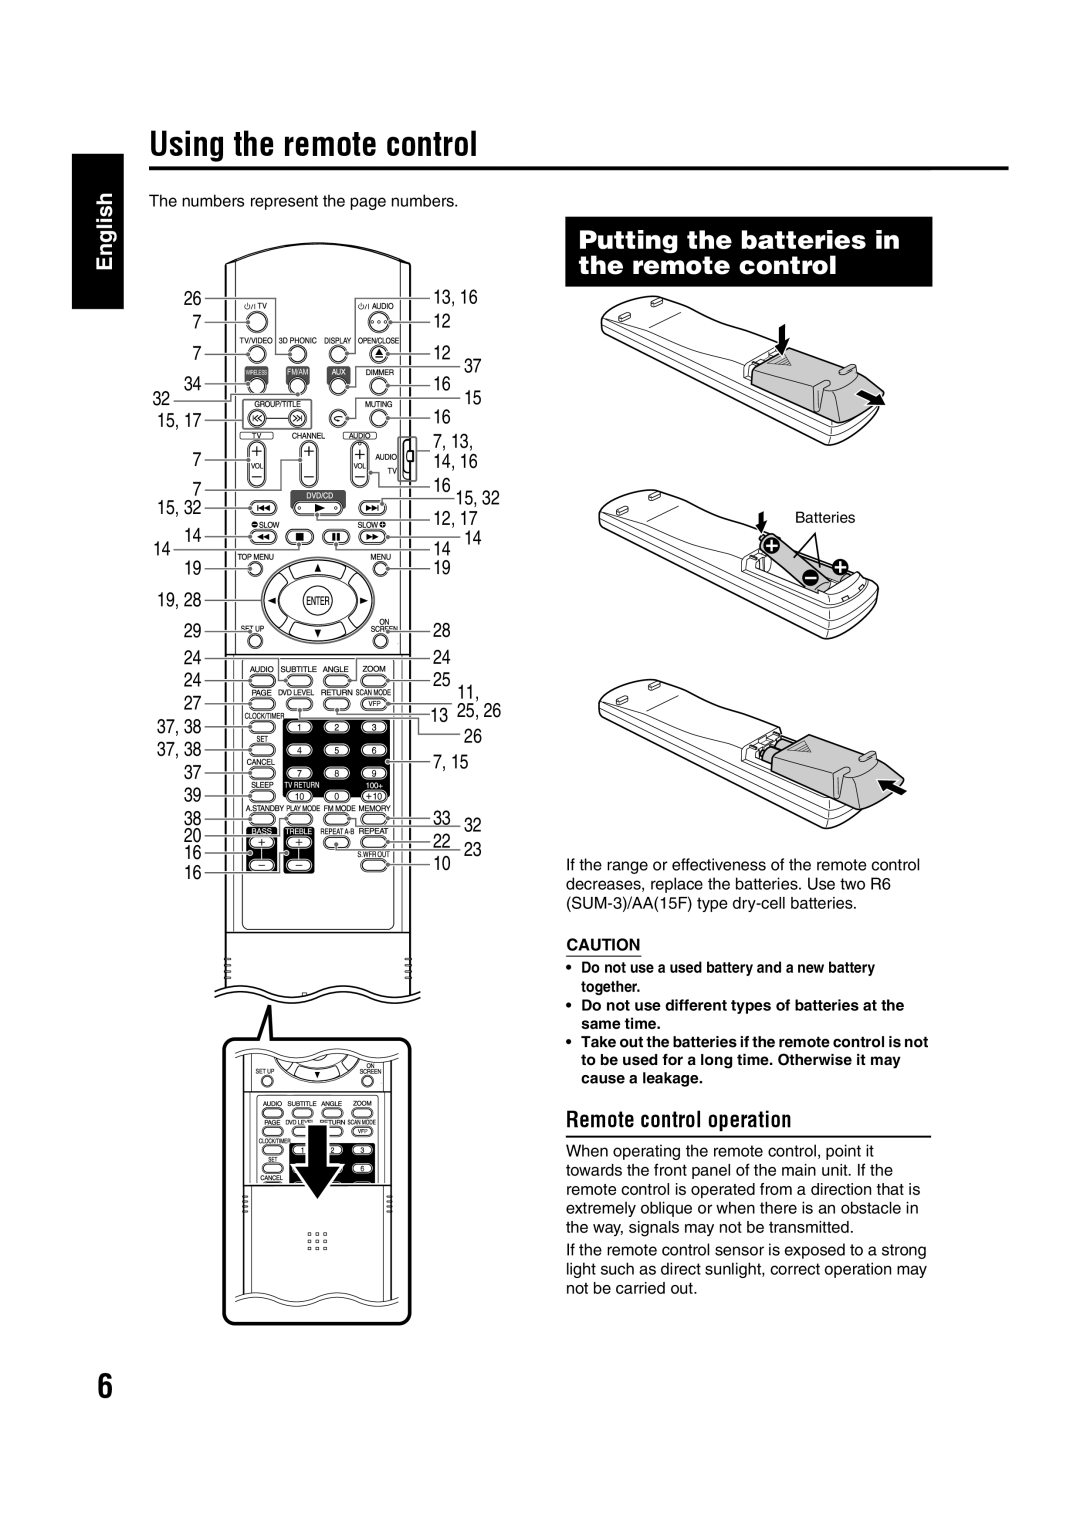 JVC GVT0144-005A Using the remote control, Putting the batteries in the remote control, Remote control operation, English 